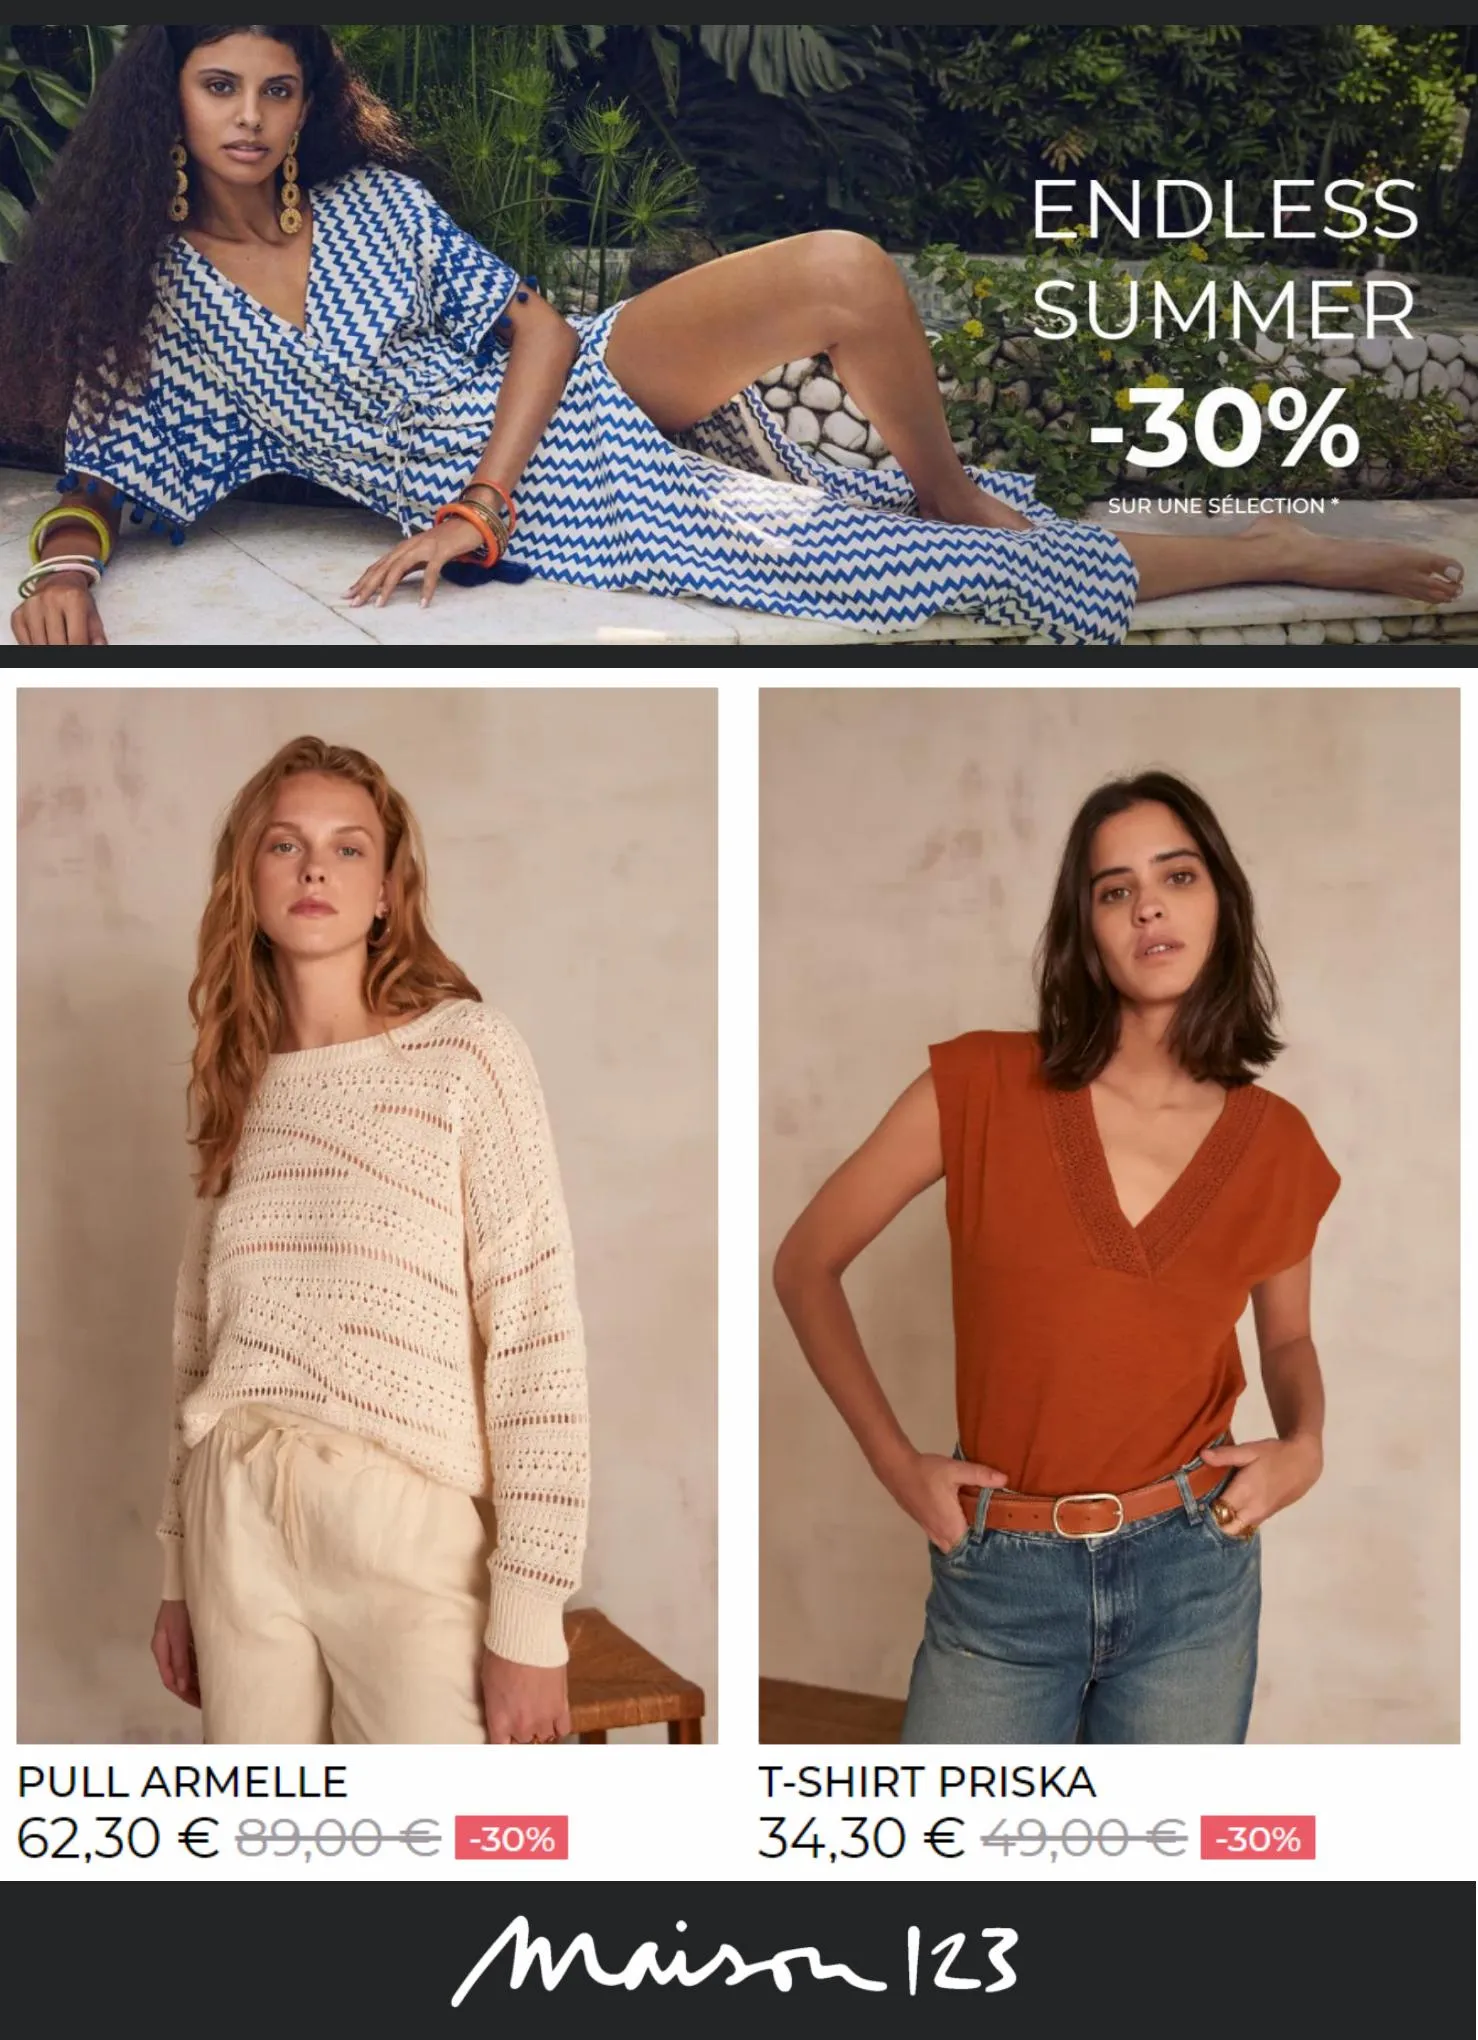 Catalogue Endless Summer -30%*, page 00006